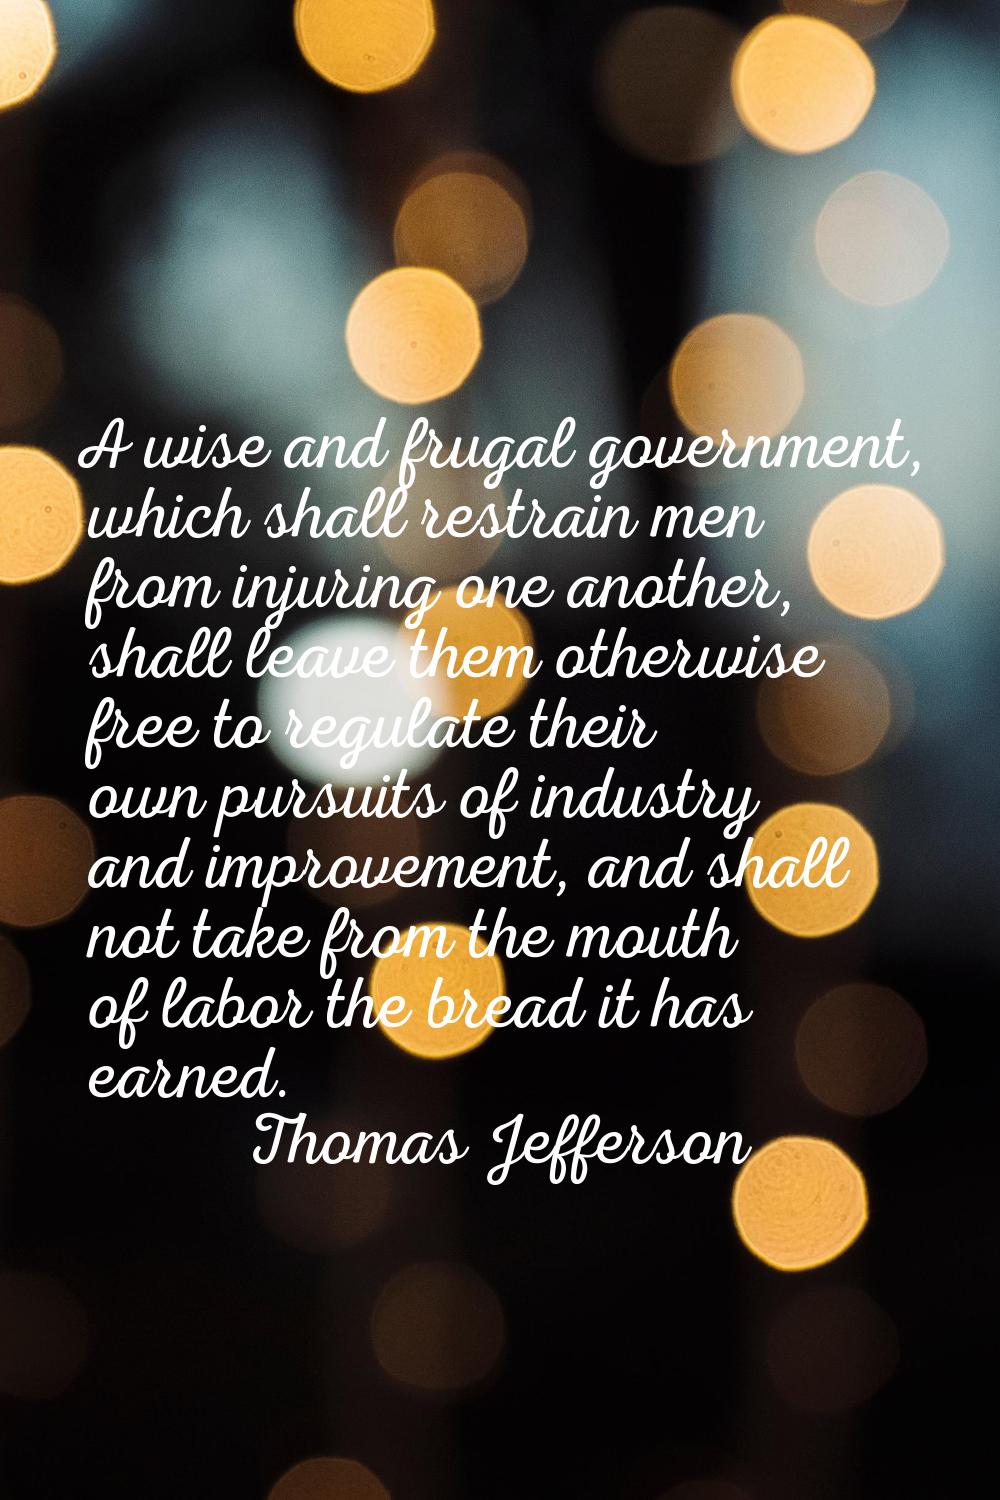 A wise and frugal government, which shall restrain men from injuring one another, shall leave them 